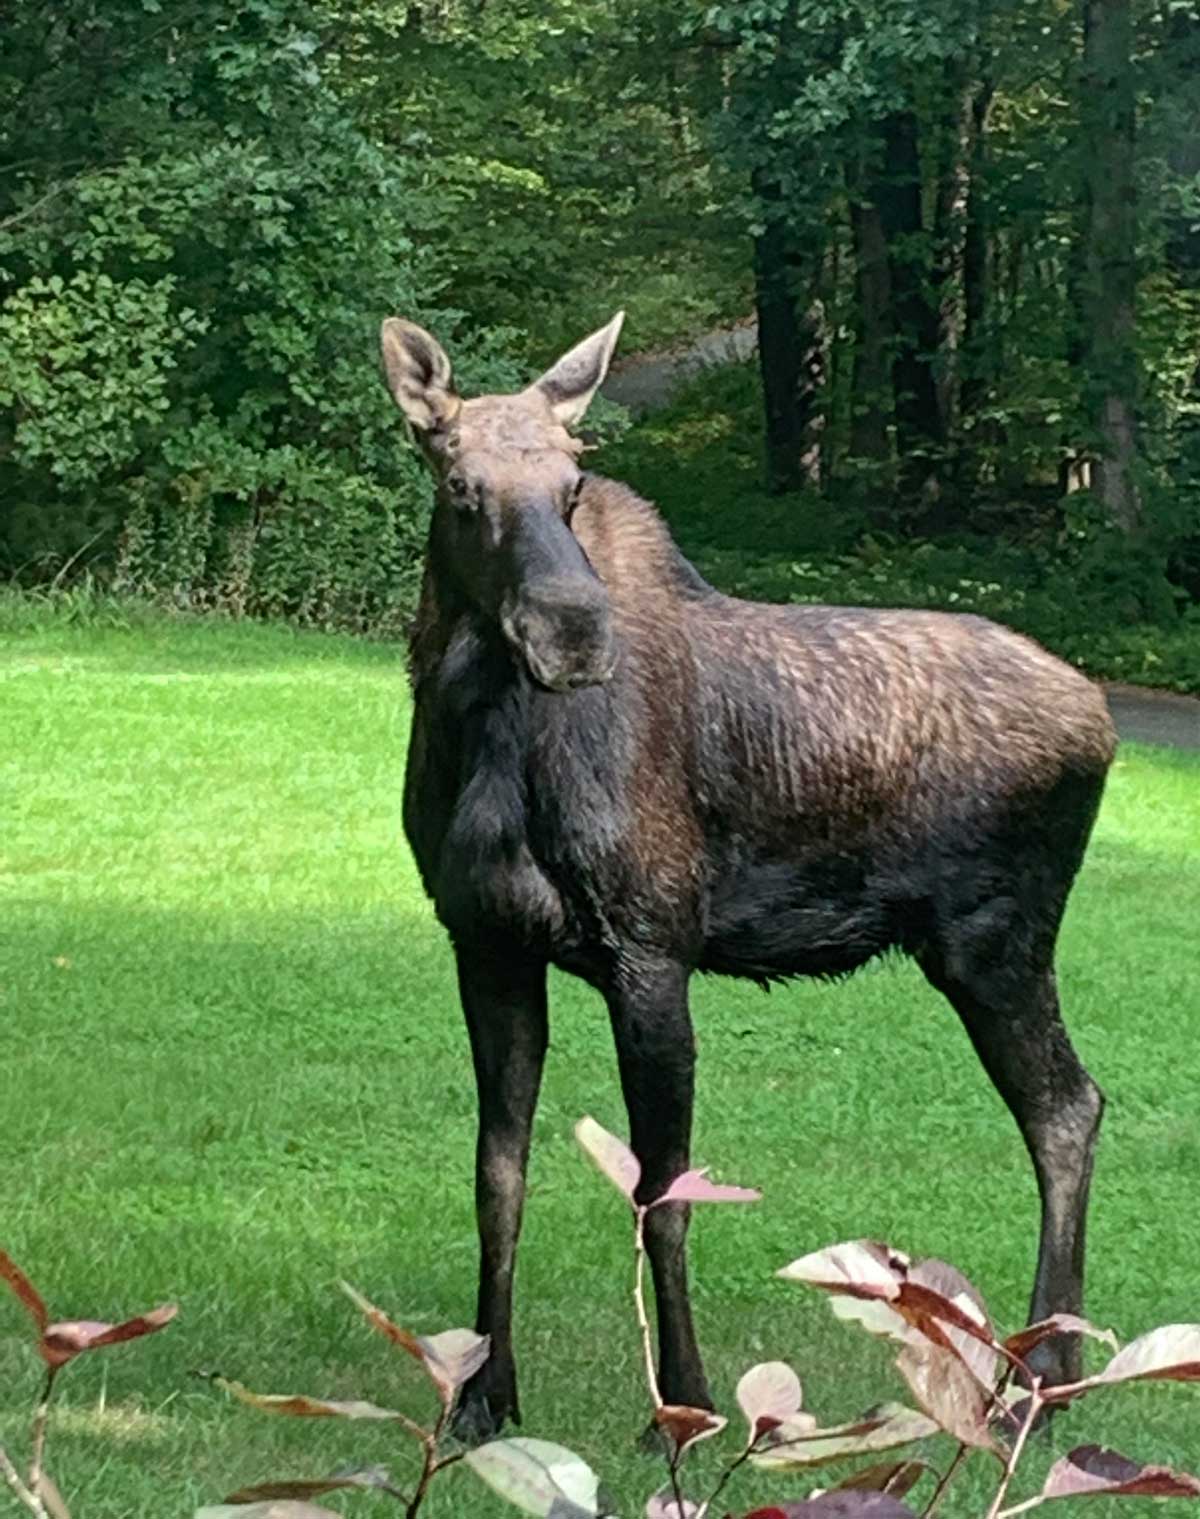 This picture I snapped on my iPhone of a moose that came into my front yard, looks like a really bad Photoshop job